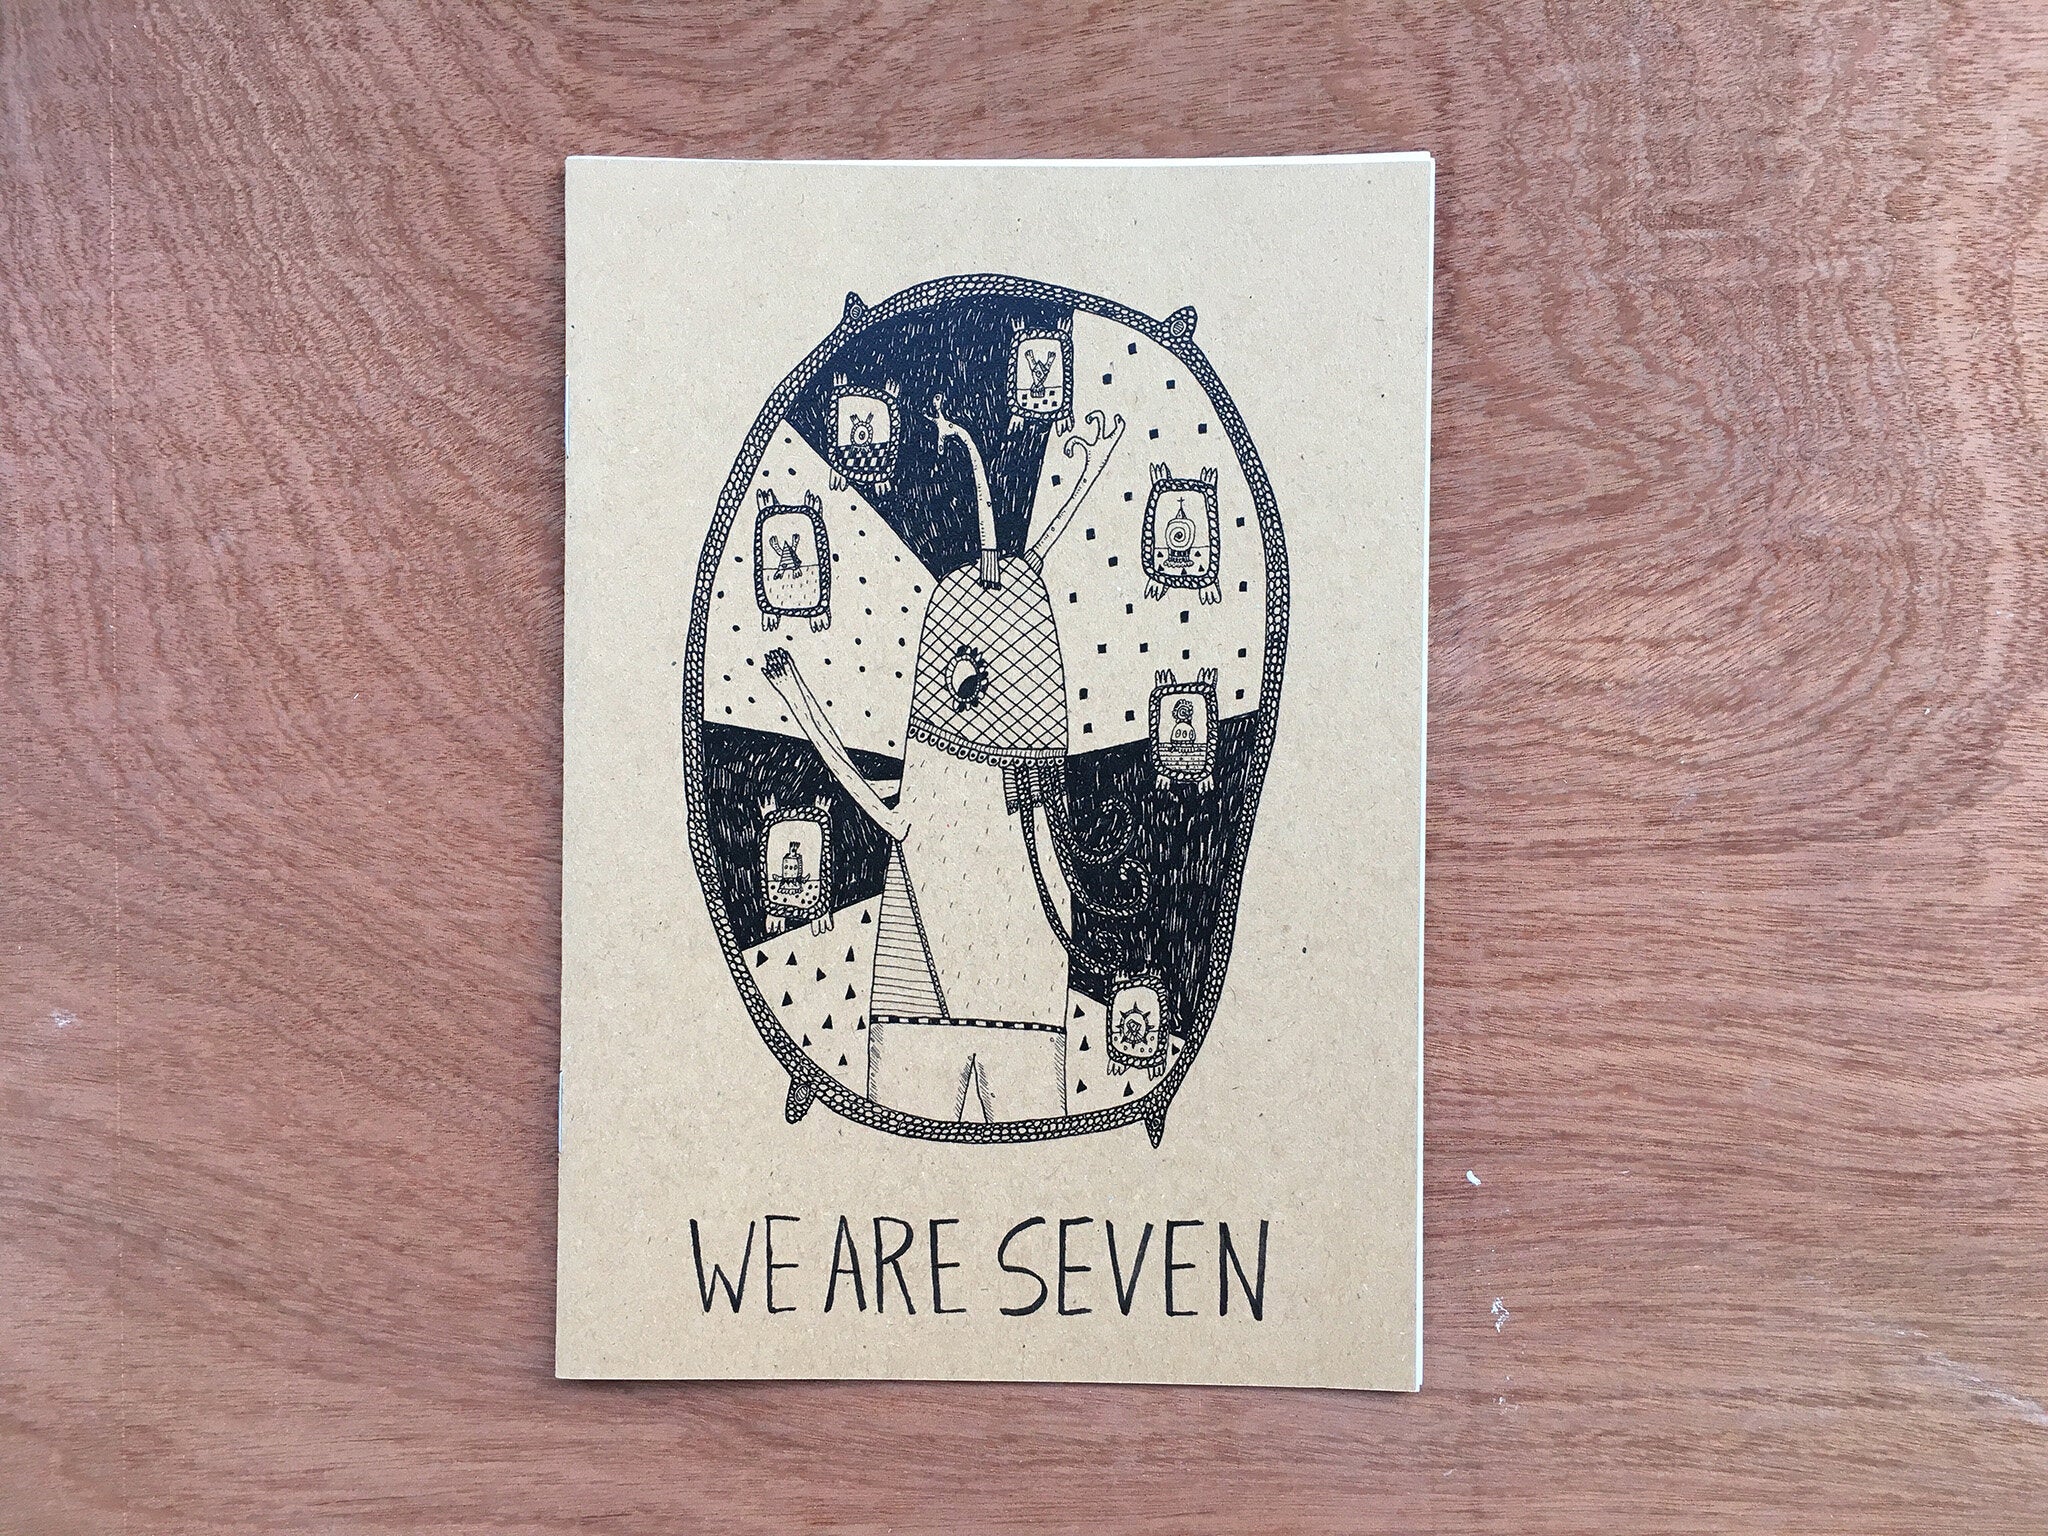 WE ARE SEVEN by Michael Powell